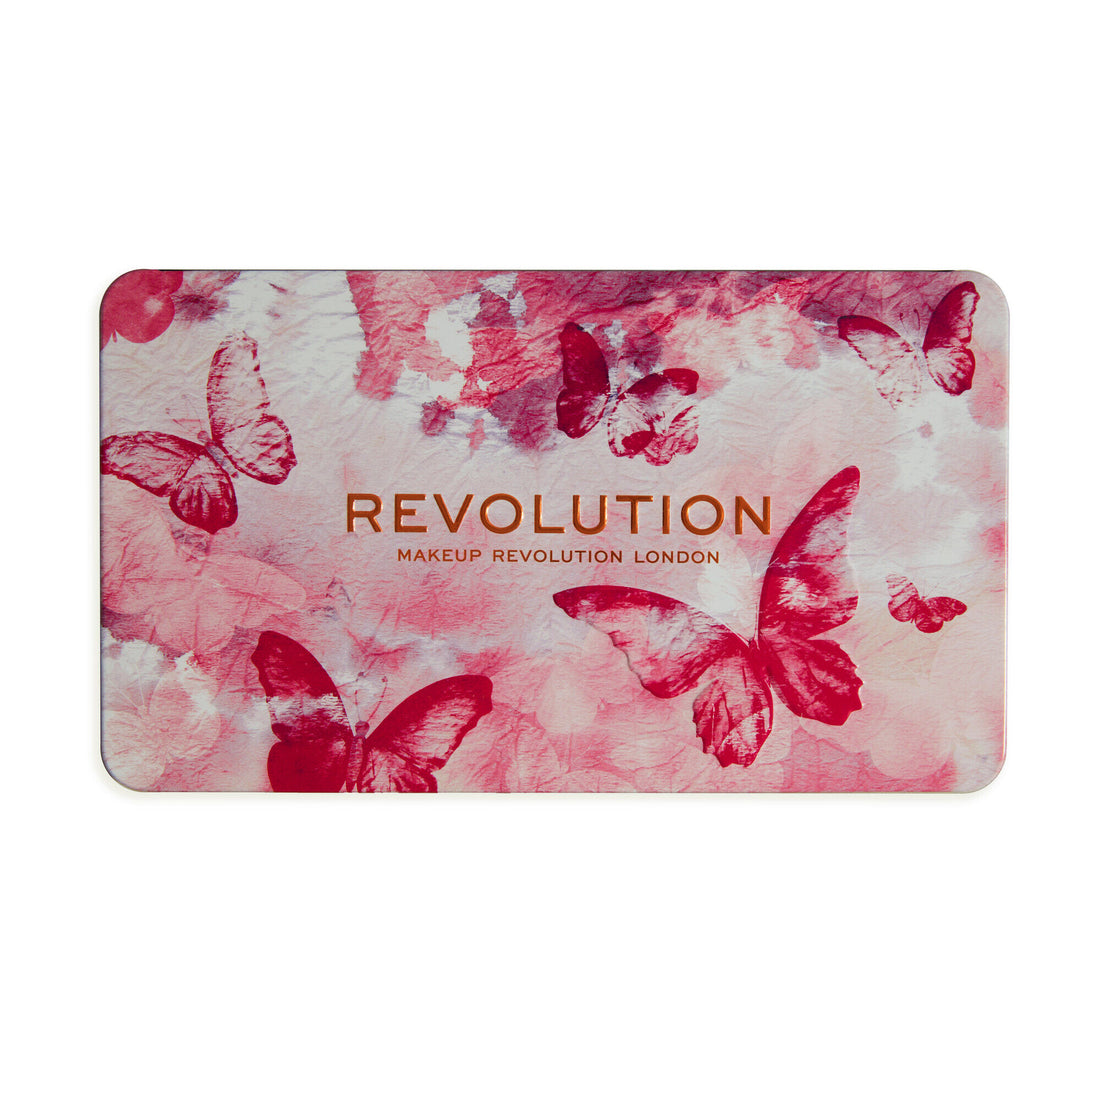 Forever Flawless Soft Butterfly Eyeshadow Palette - Makeup Revolution.